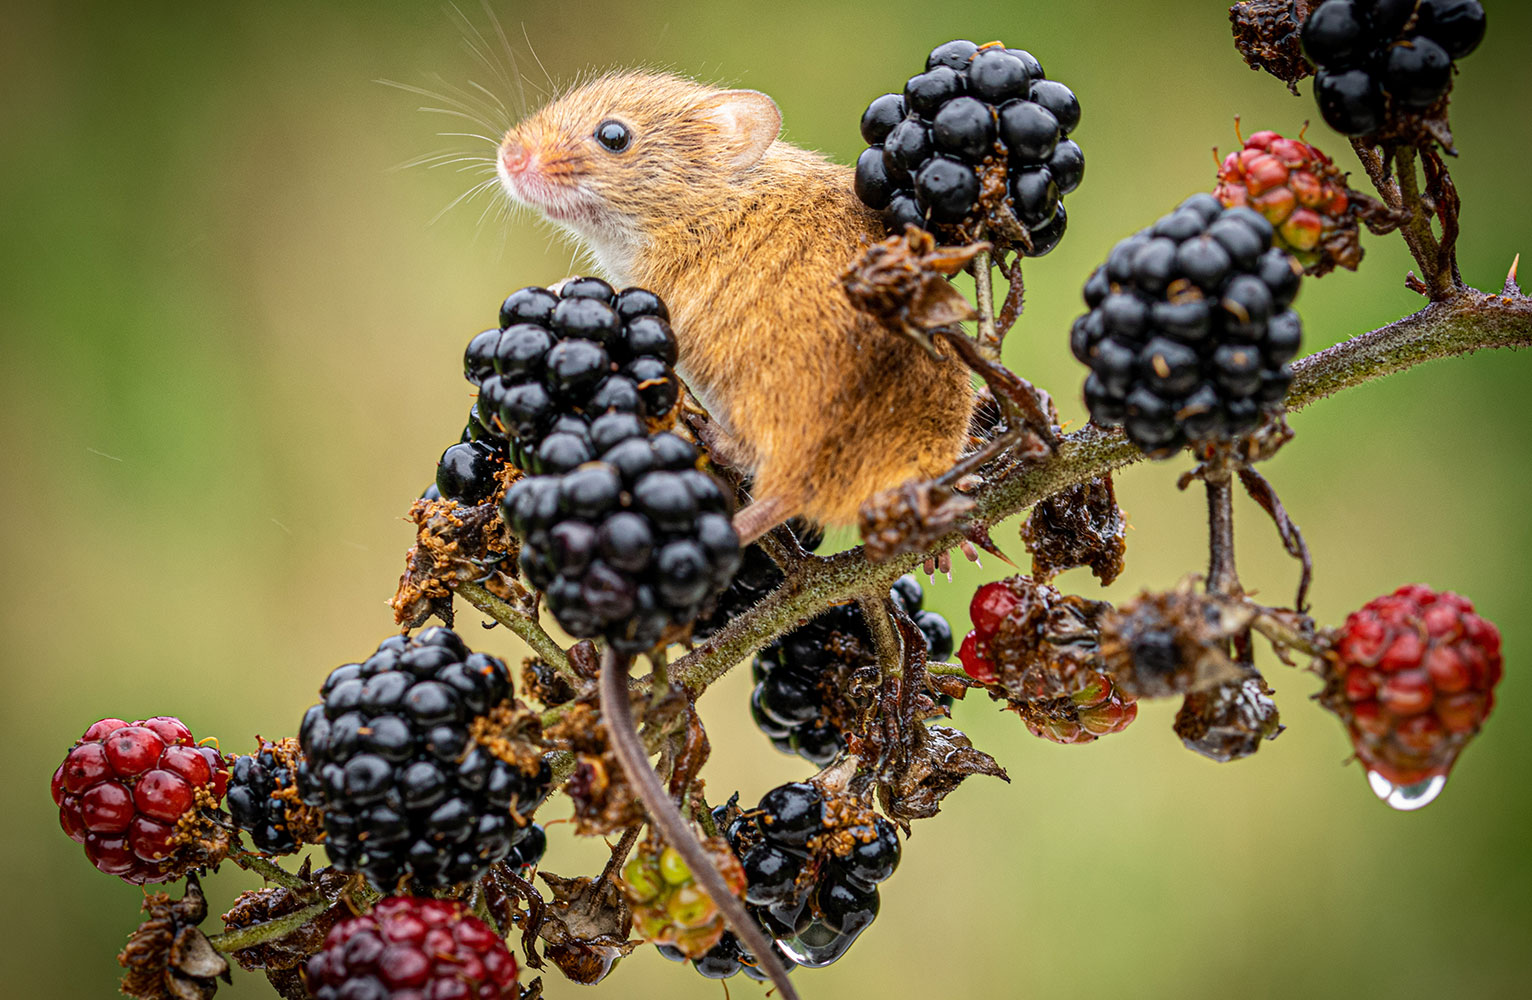 harvest mouse with blackberries